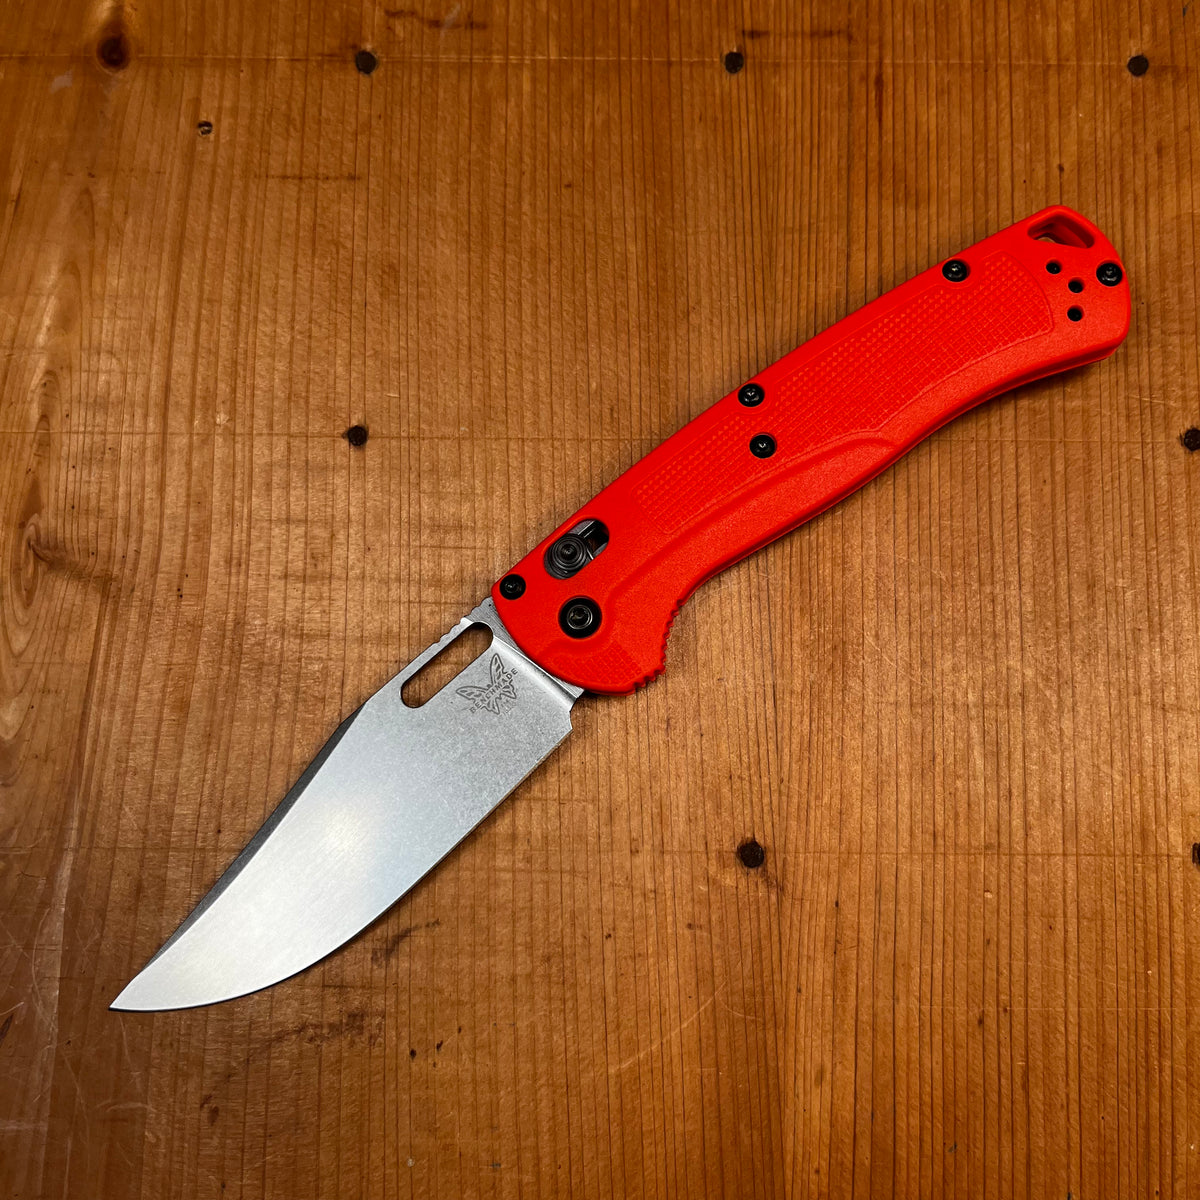 Benchmade 15535 Taggedout Clip Point CPM-154 AXIS Lock Orange Grivory Handle